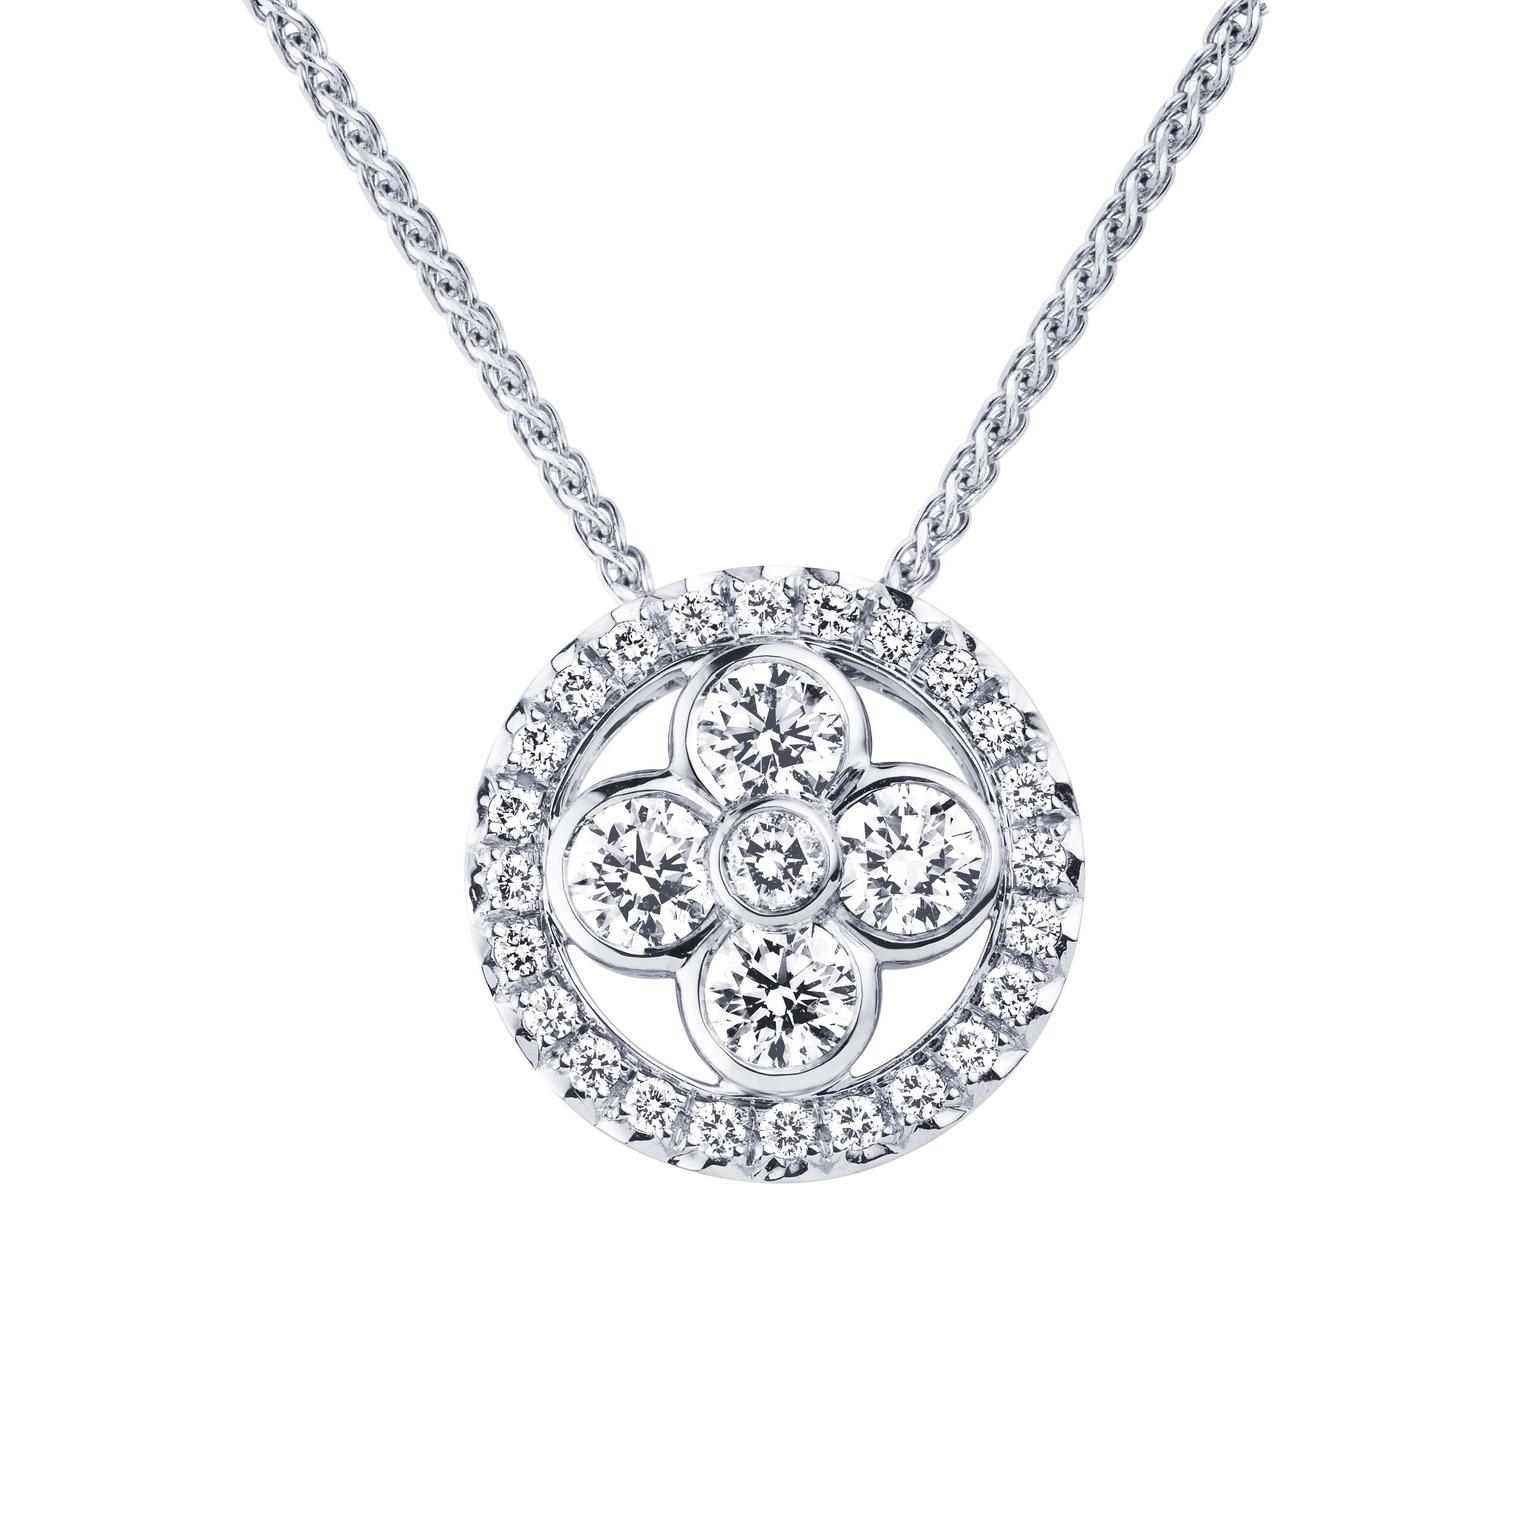 This Louis Vuitton Monogram Sun pendant necklace radiates warmth thanks to the use of summer-bright white gold and diamonds.